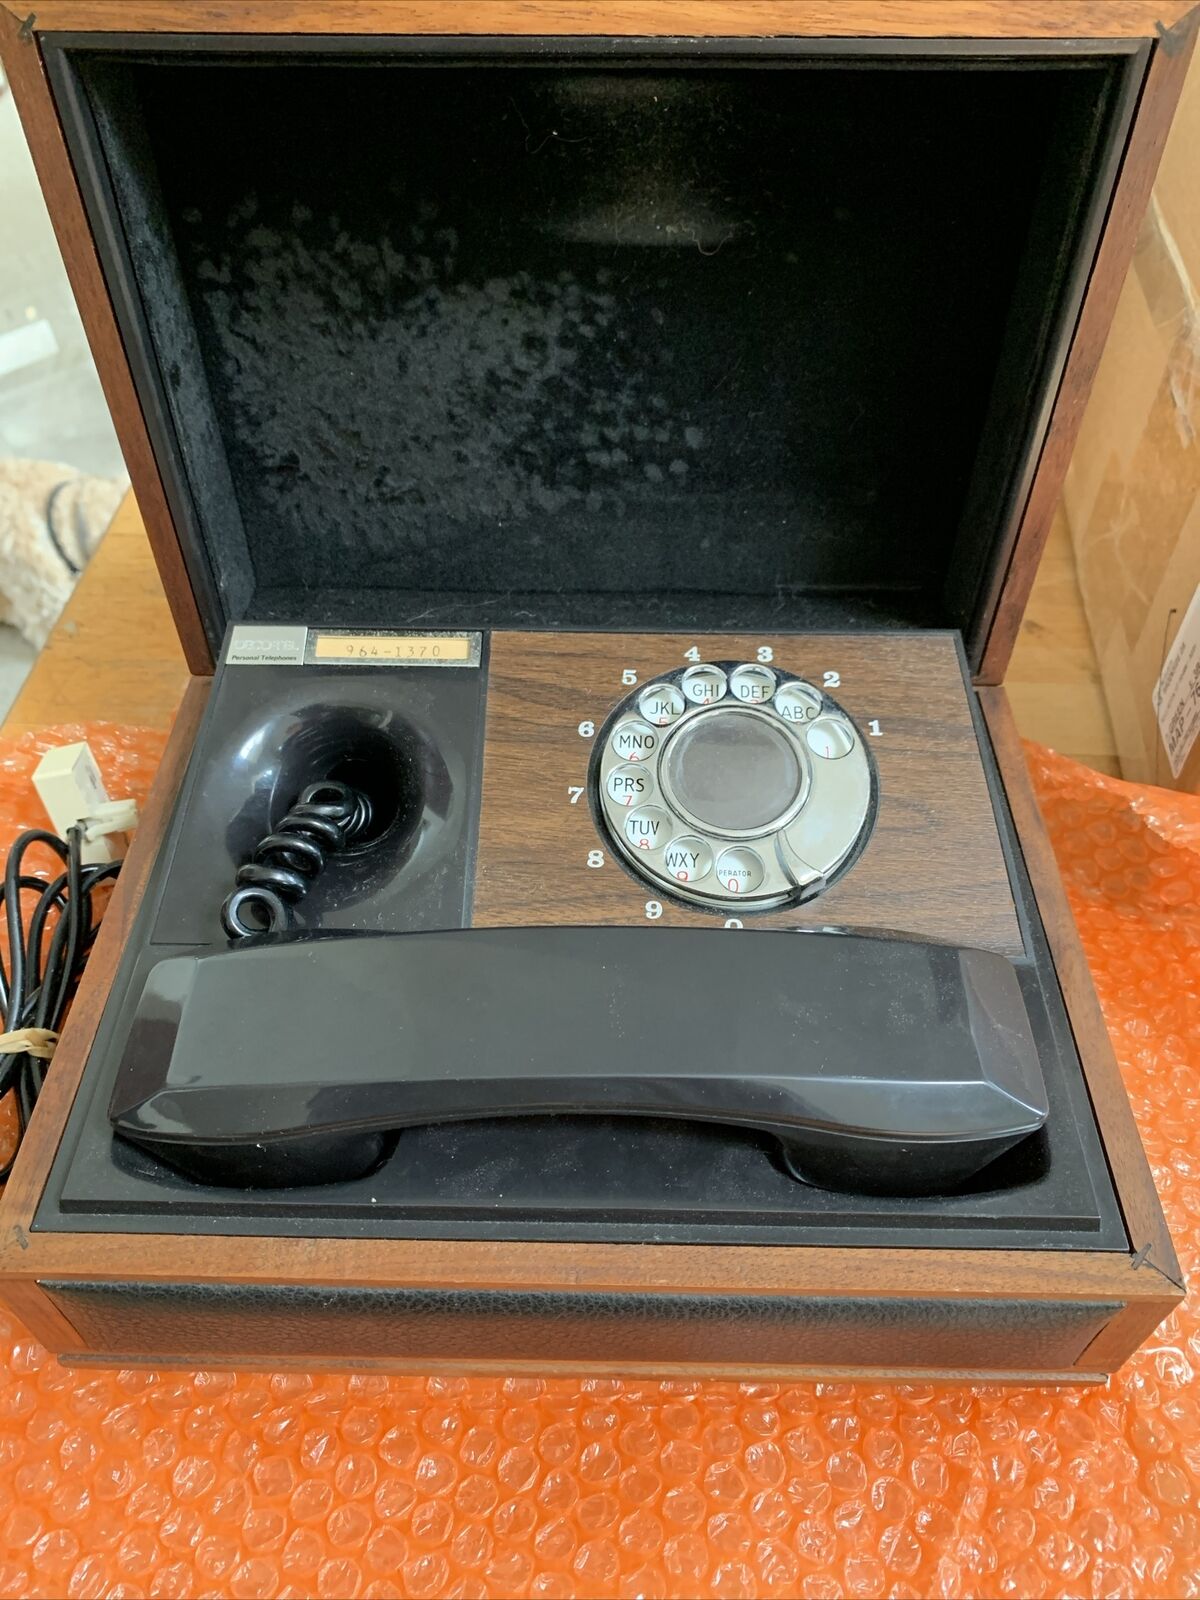 Retro 60/70s DECOTEL rotary Phone In Vintage Leather/ Wood Case w/ Original Cord